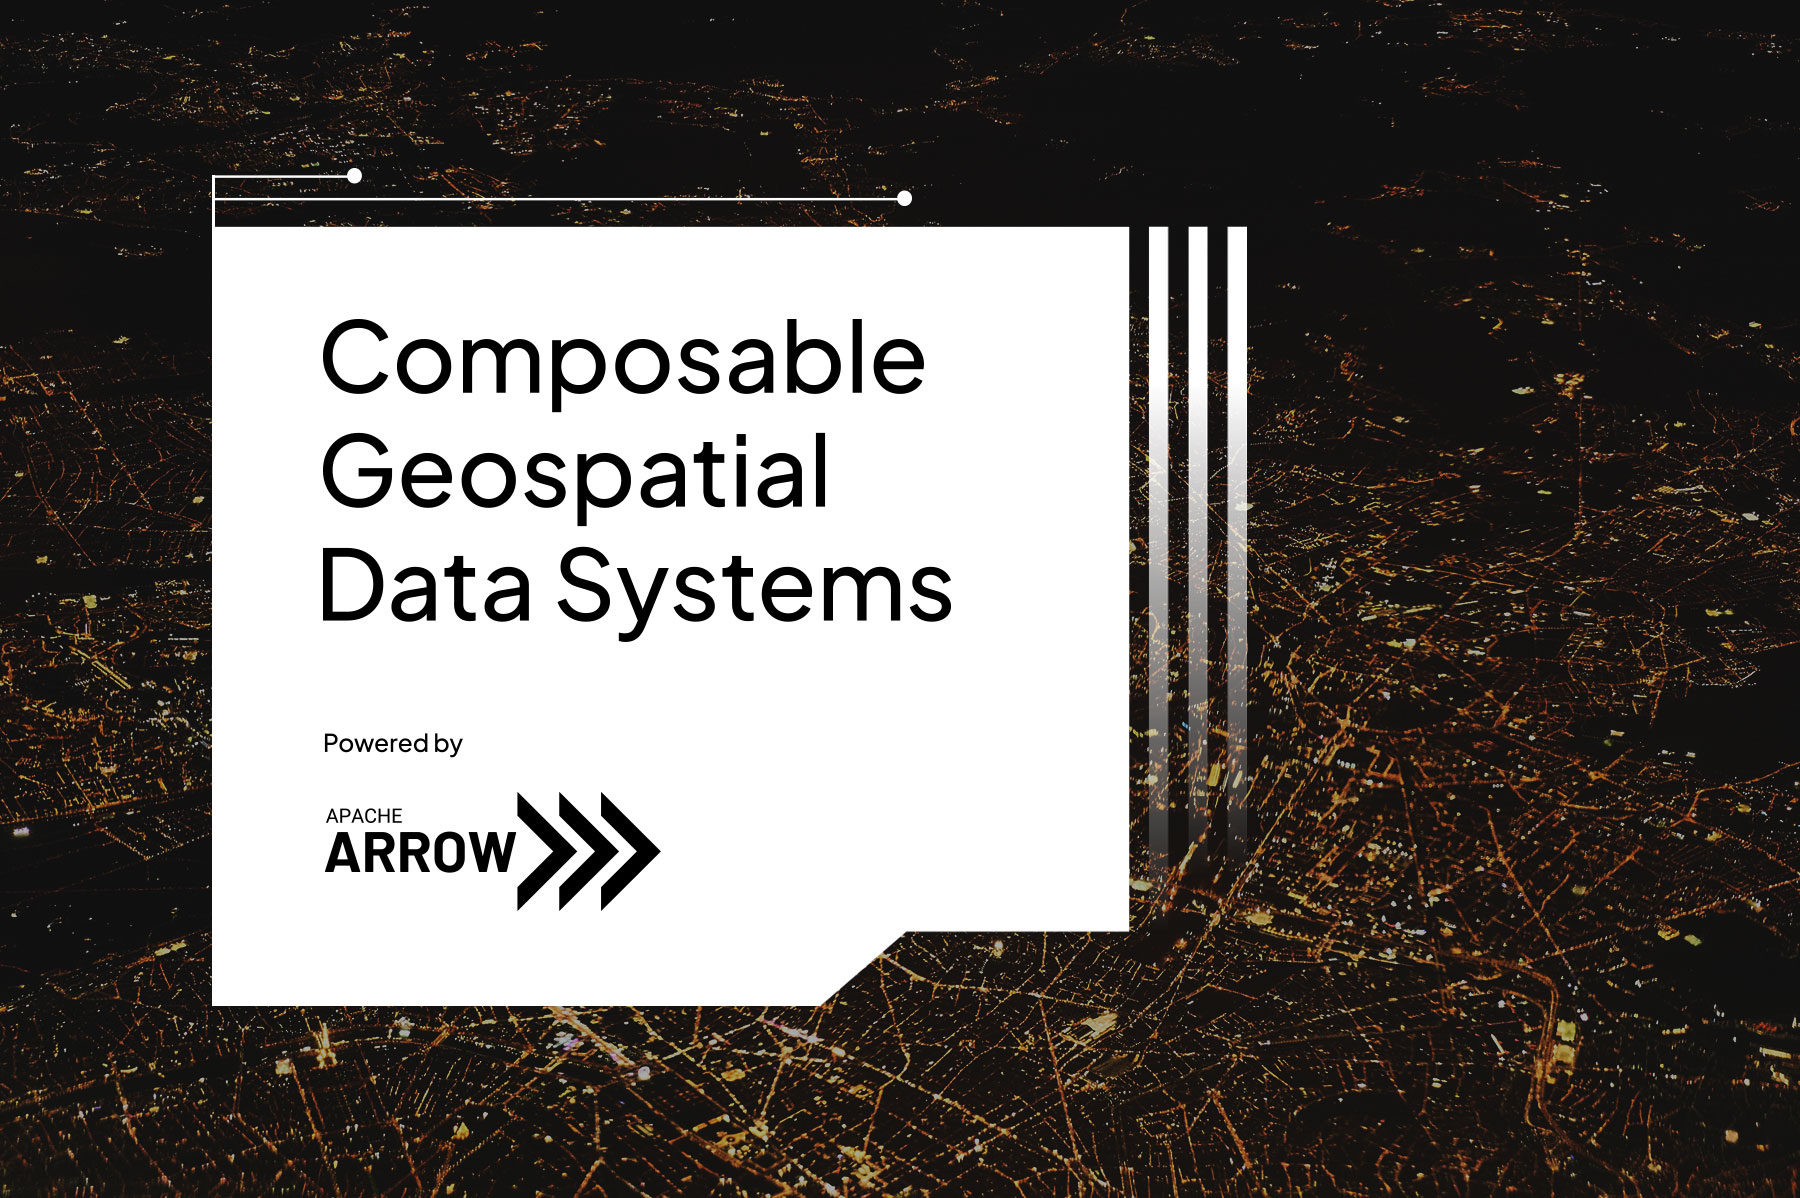 Image with the words Composable Geospatial Data Systems powered by Arrow. It is set on top of a image of a city grid at night.